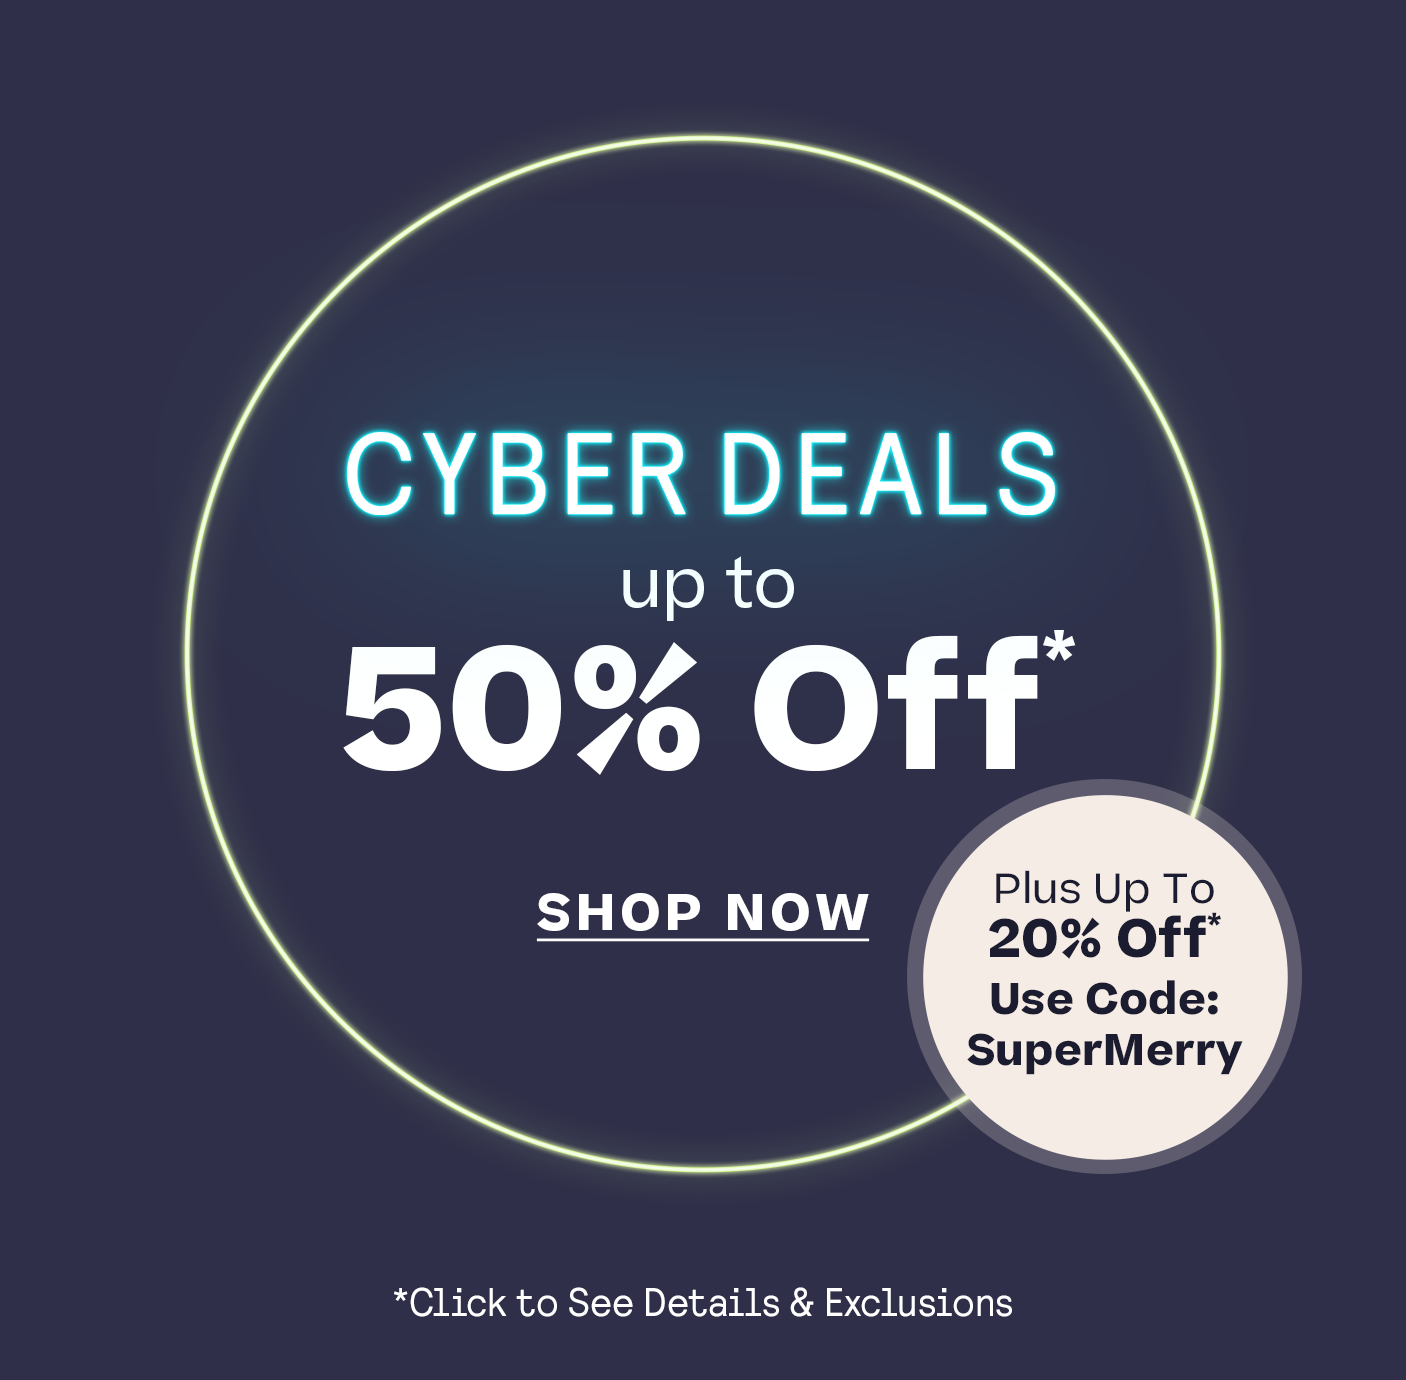 Cyber Deals: up to 50% Off* + (up to 20% Off) CODE: SUPERMERRY *Click for details